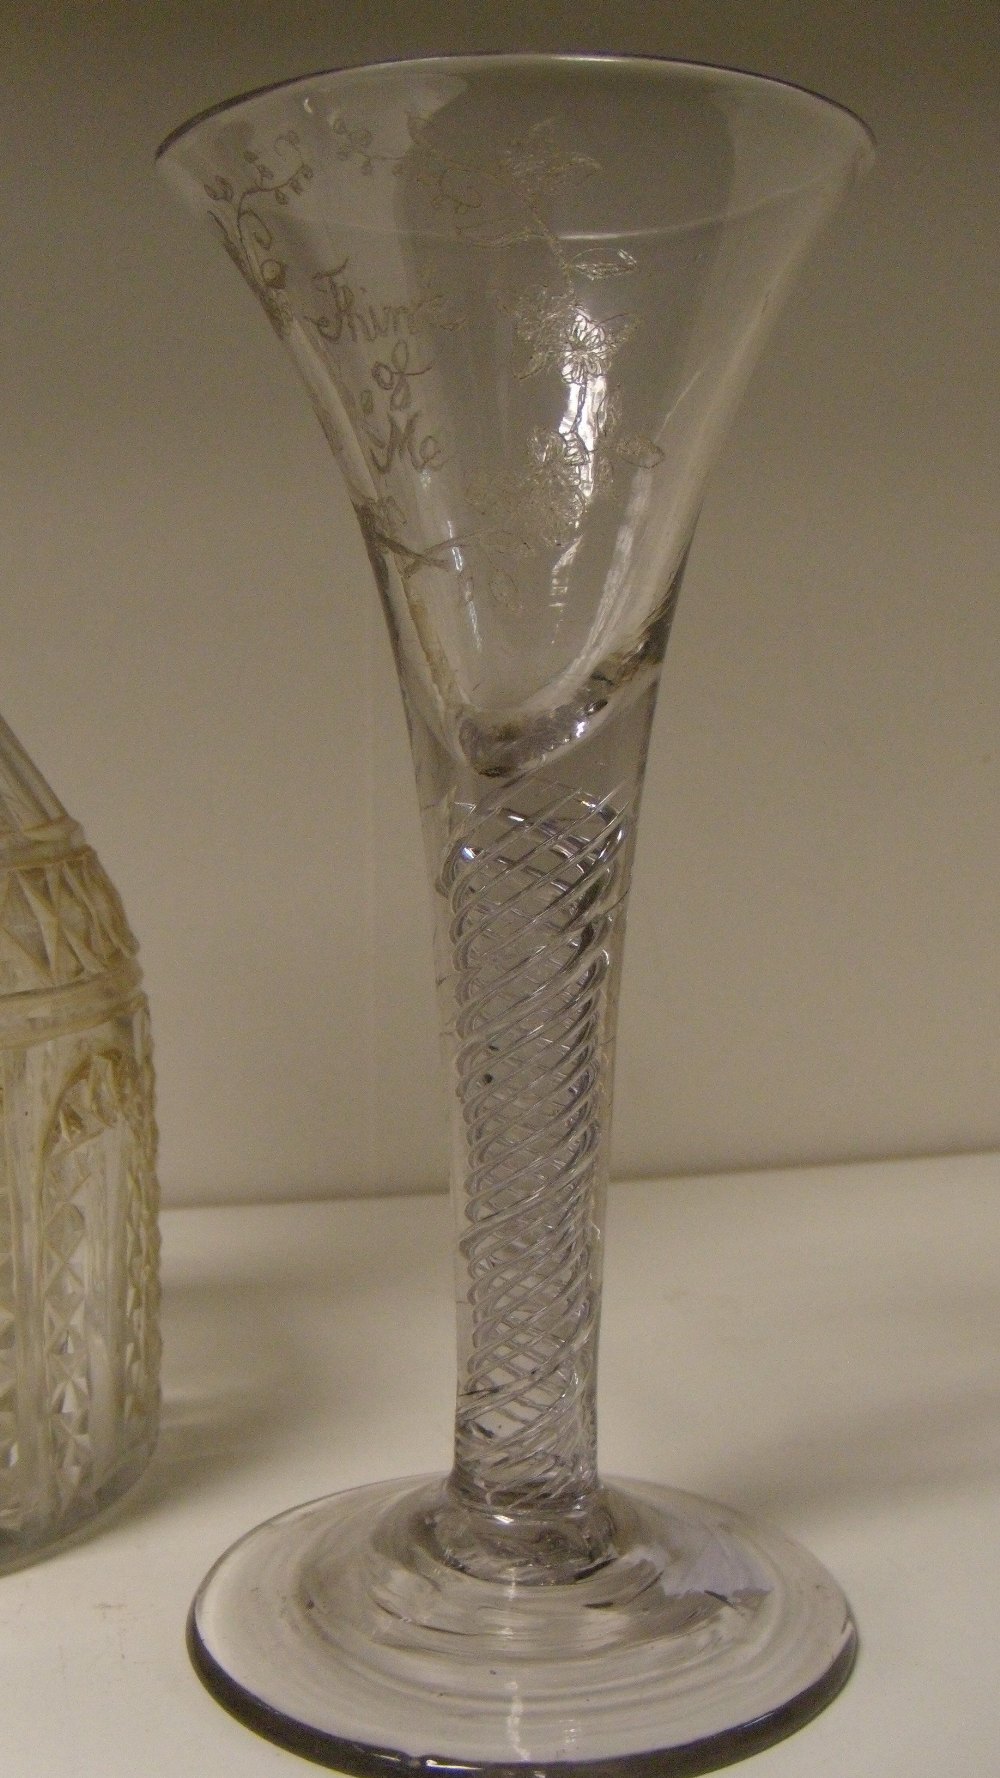 Two 18th century glasses together with an Irish decanter and stopper, the cordial with facetted stem - Image 3 of 6